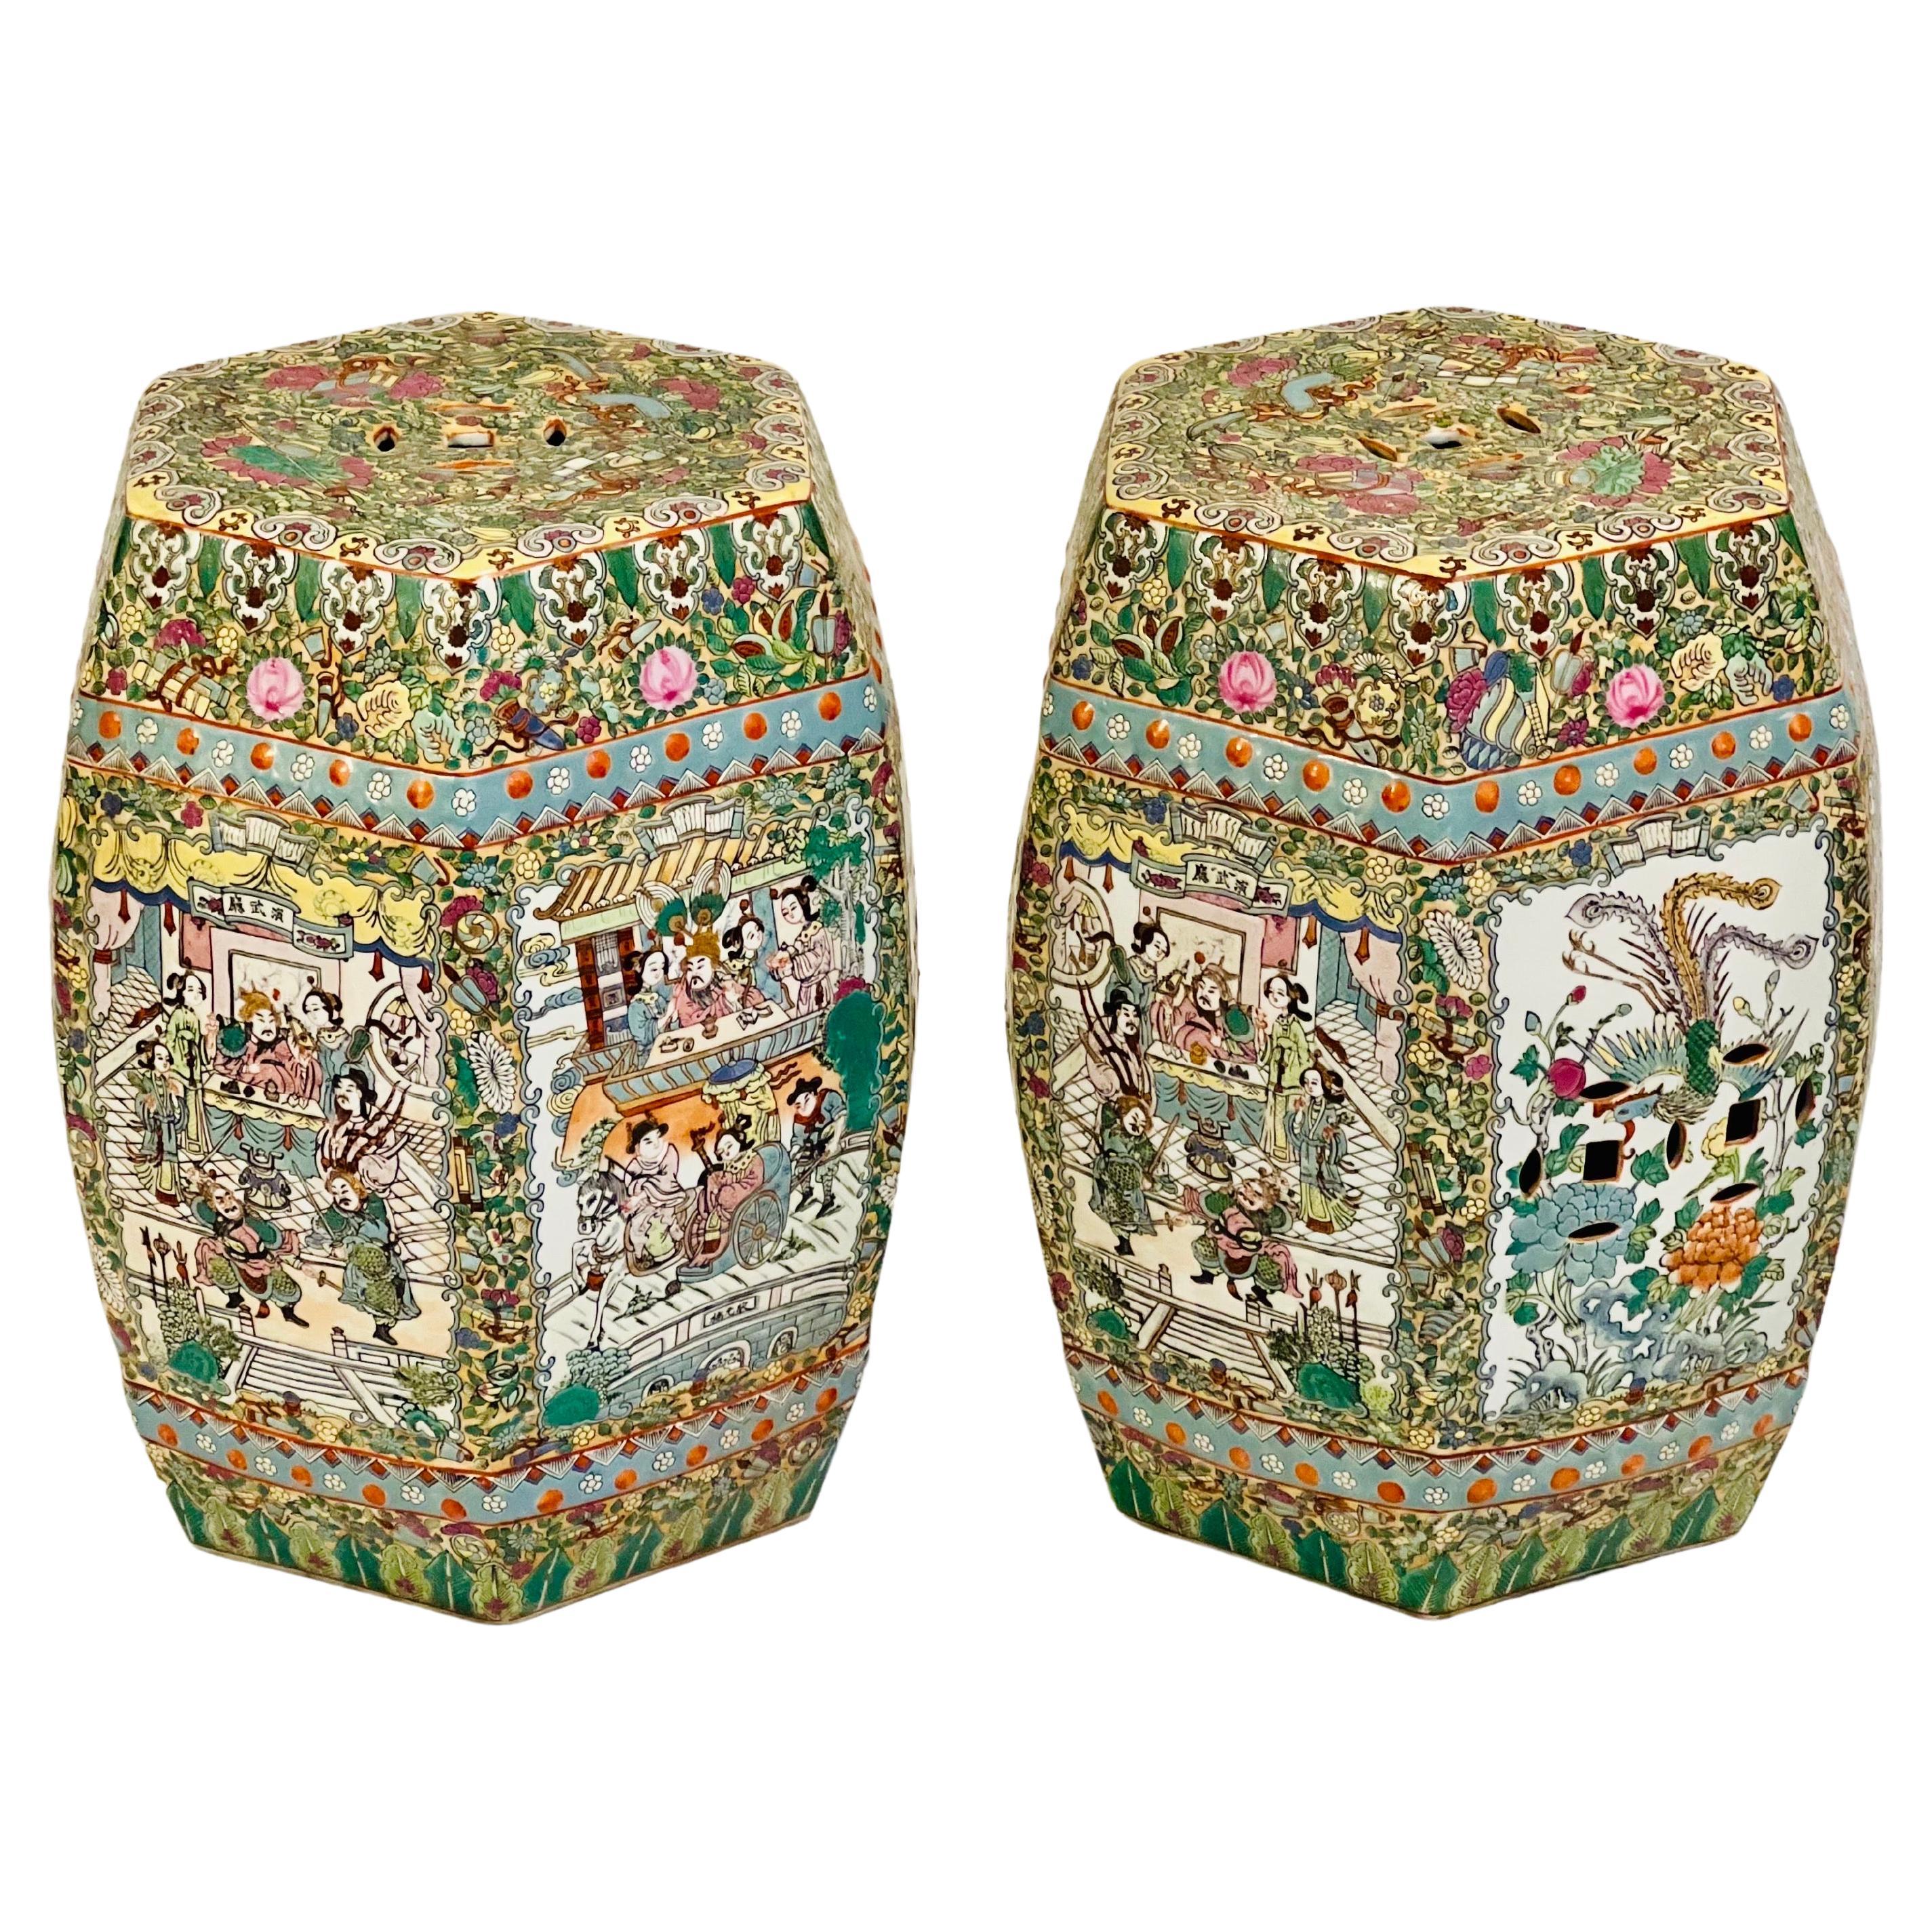 Vintage Hand Painted Porcelain Chinese Garden Stools, Pair For Sale